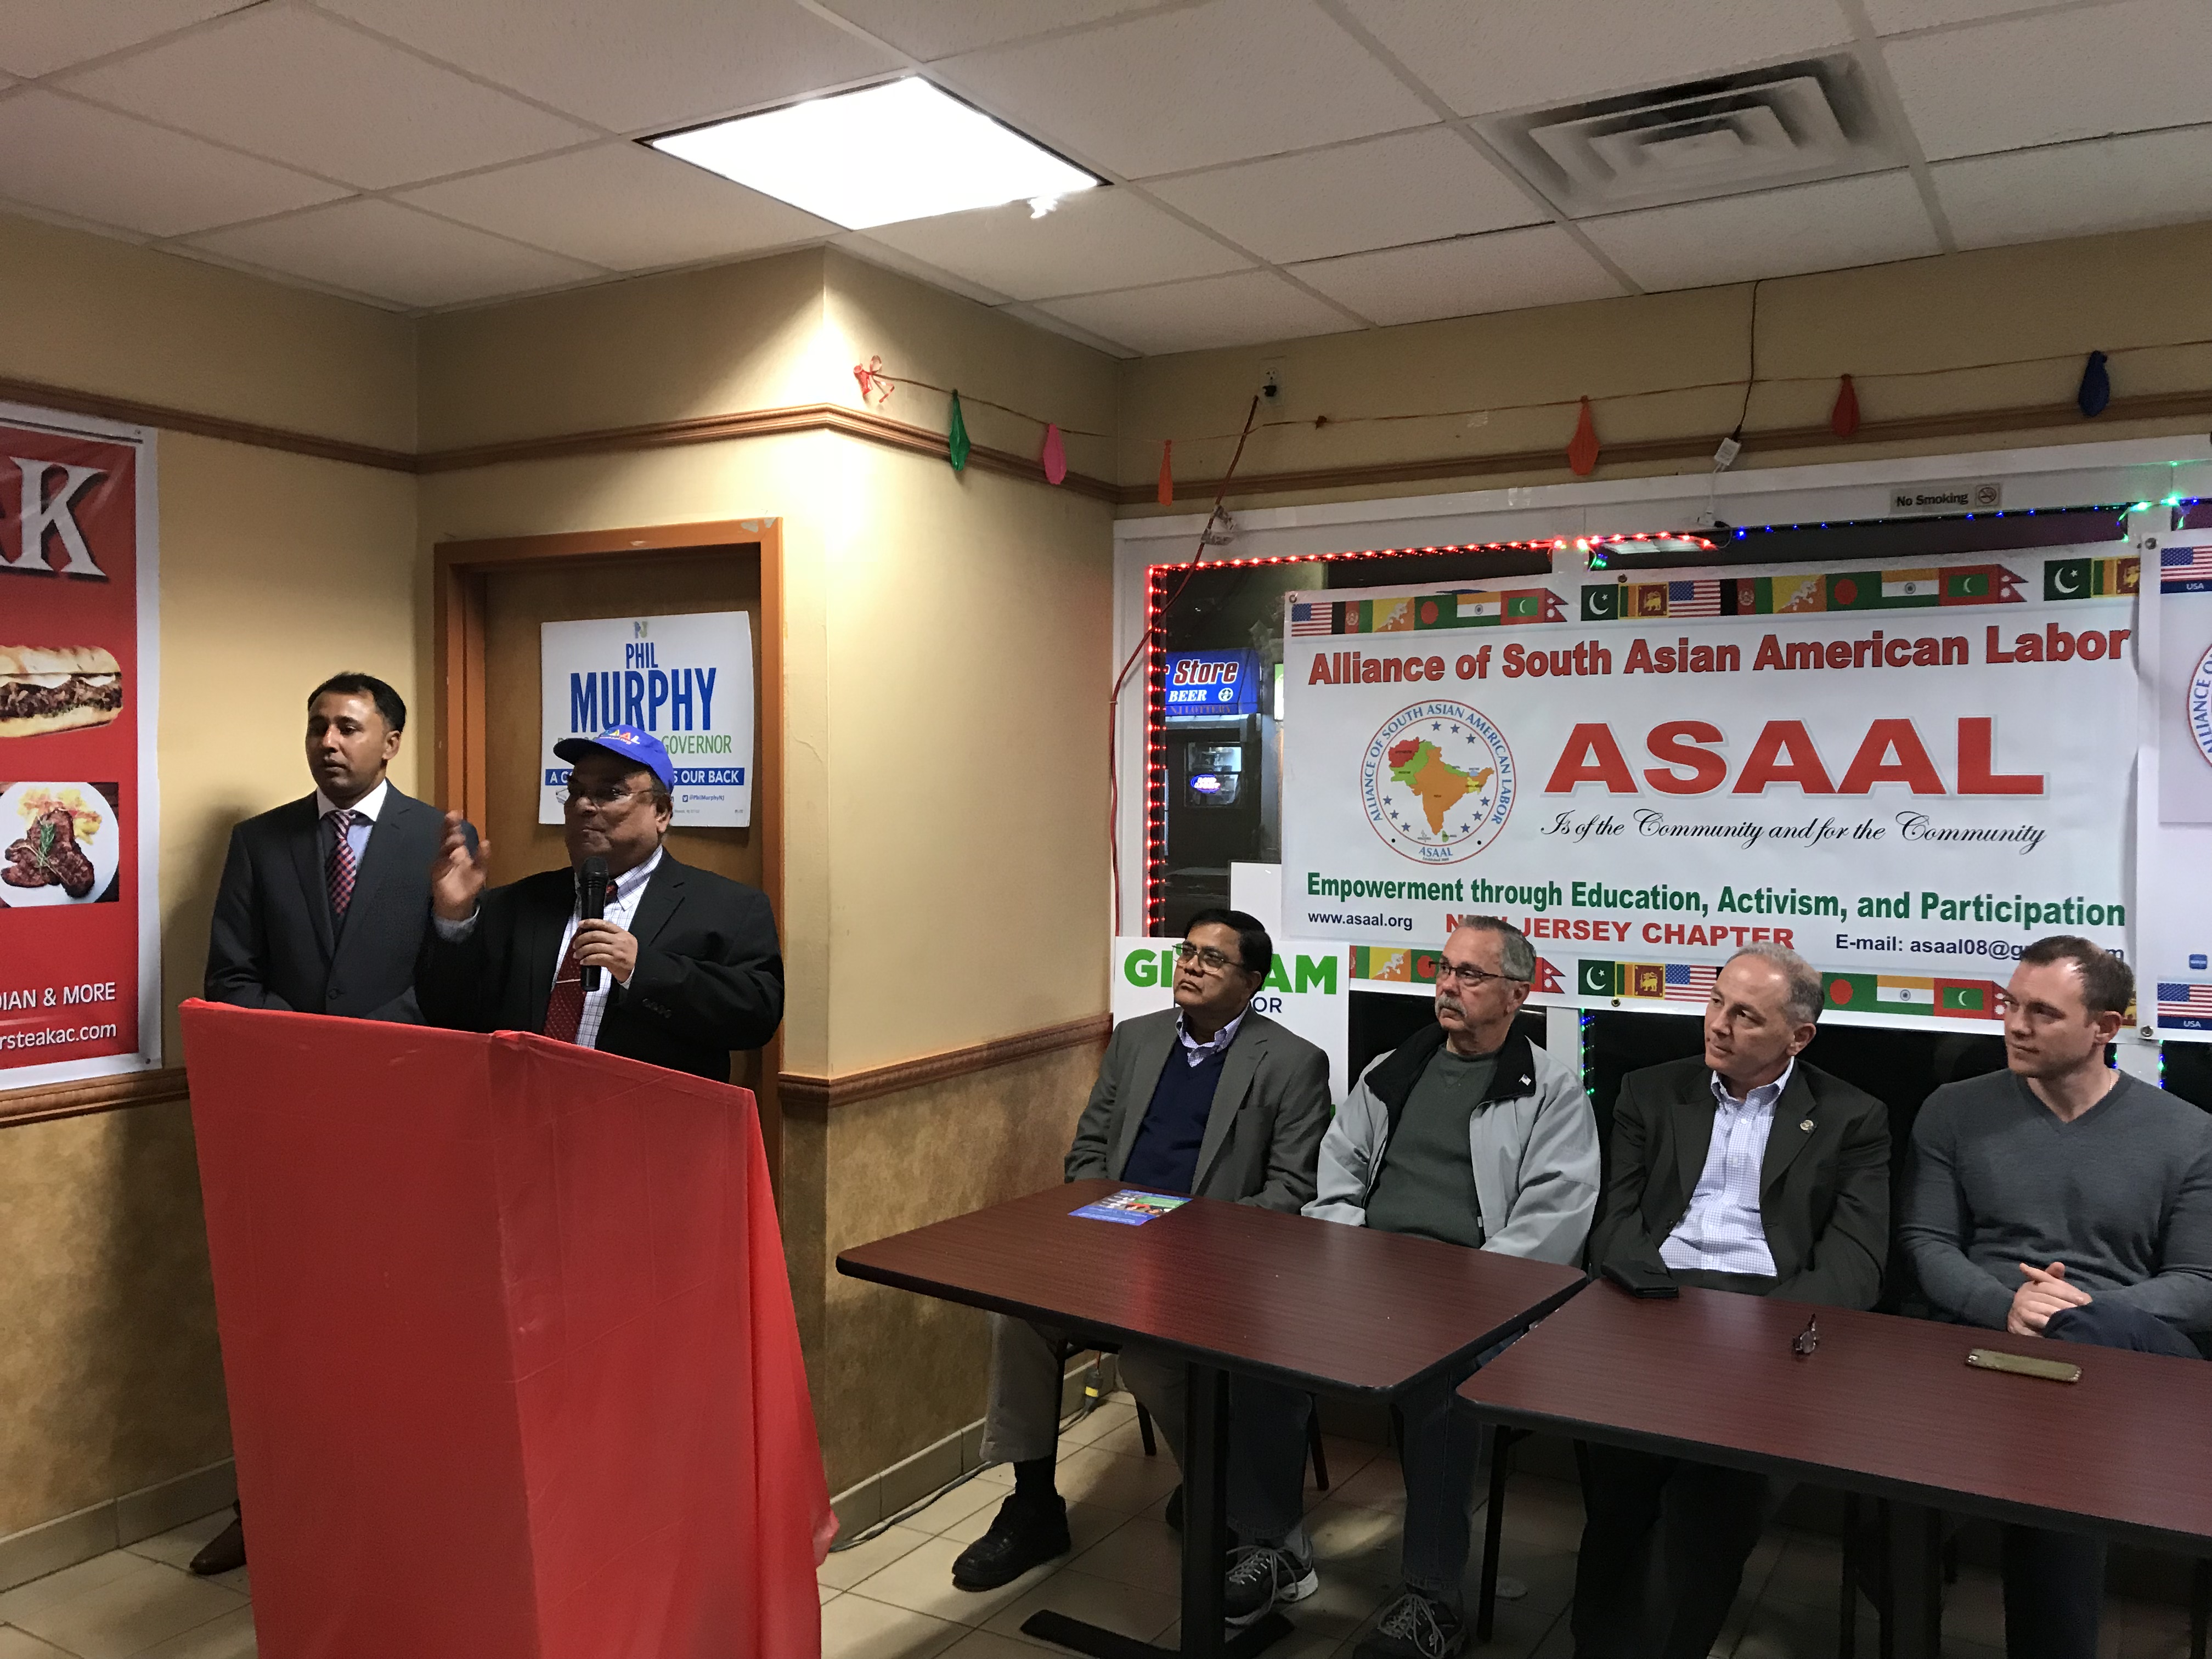 ASAAL New Jersey Chapter staged largest phone banking for NJ Governor and Atlantic City Mayor